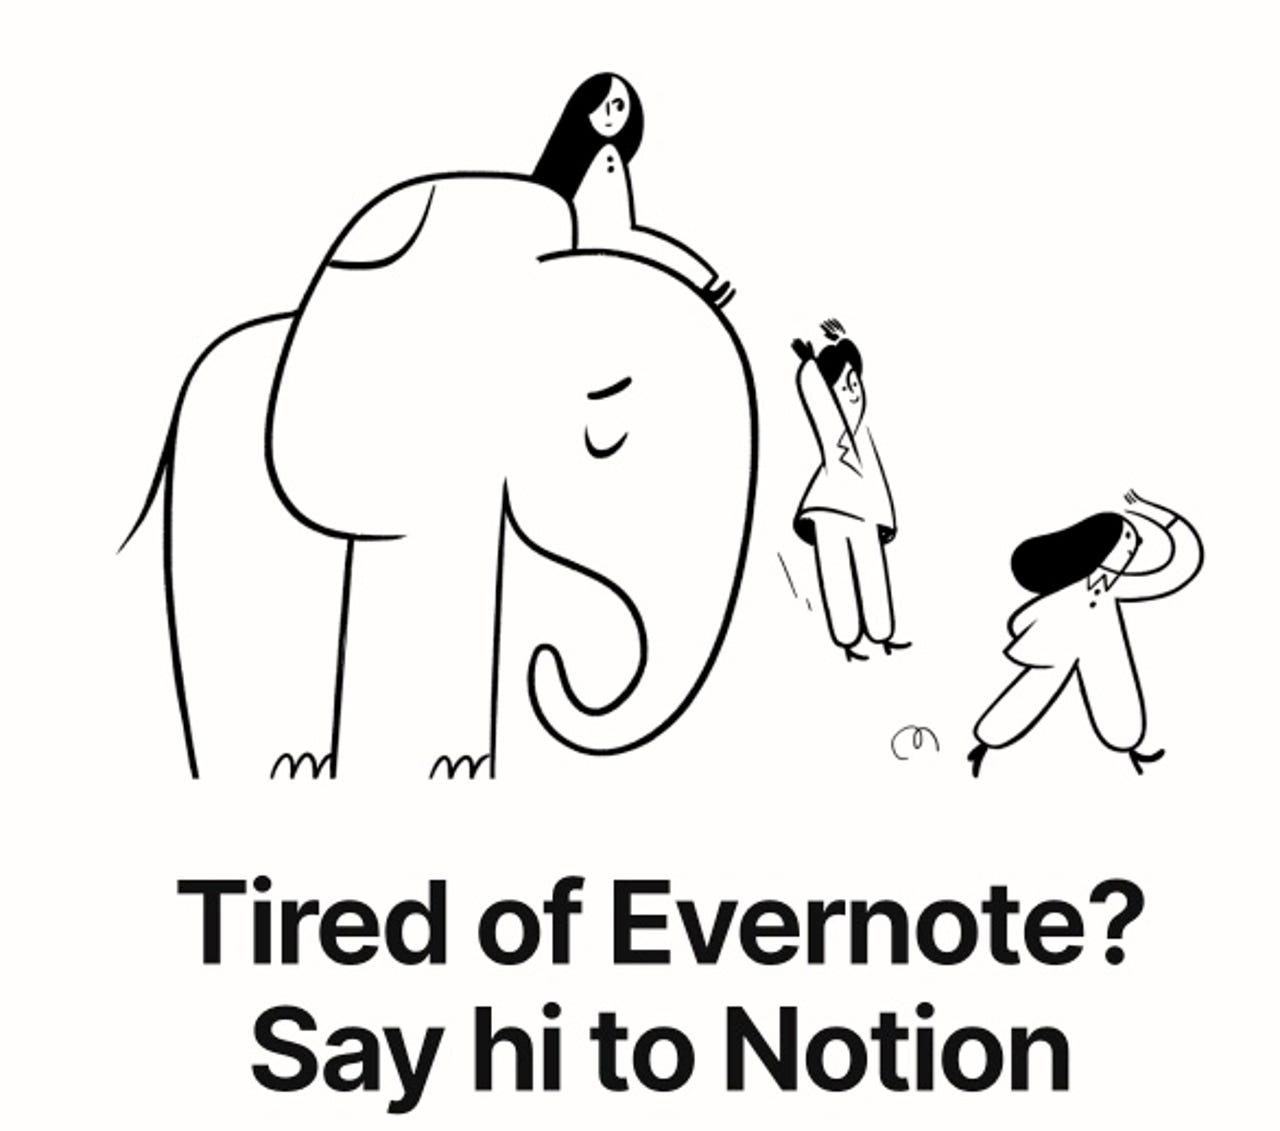 notion-vs-evernote-switch-from-evernote-2022-08-28-16-10-17